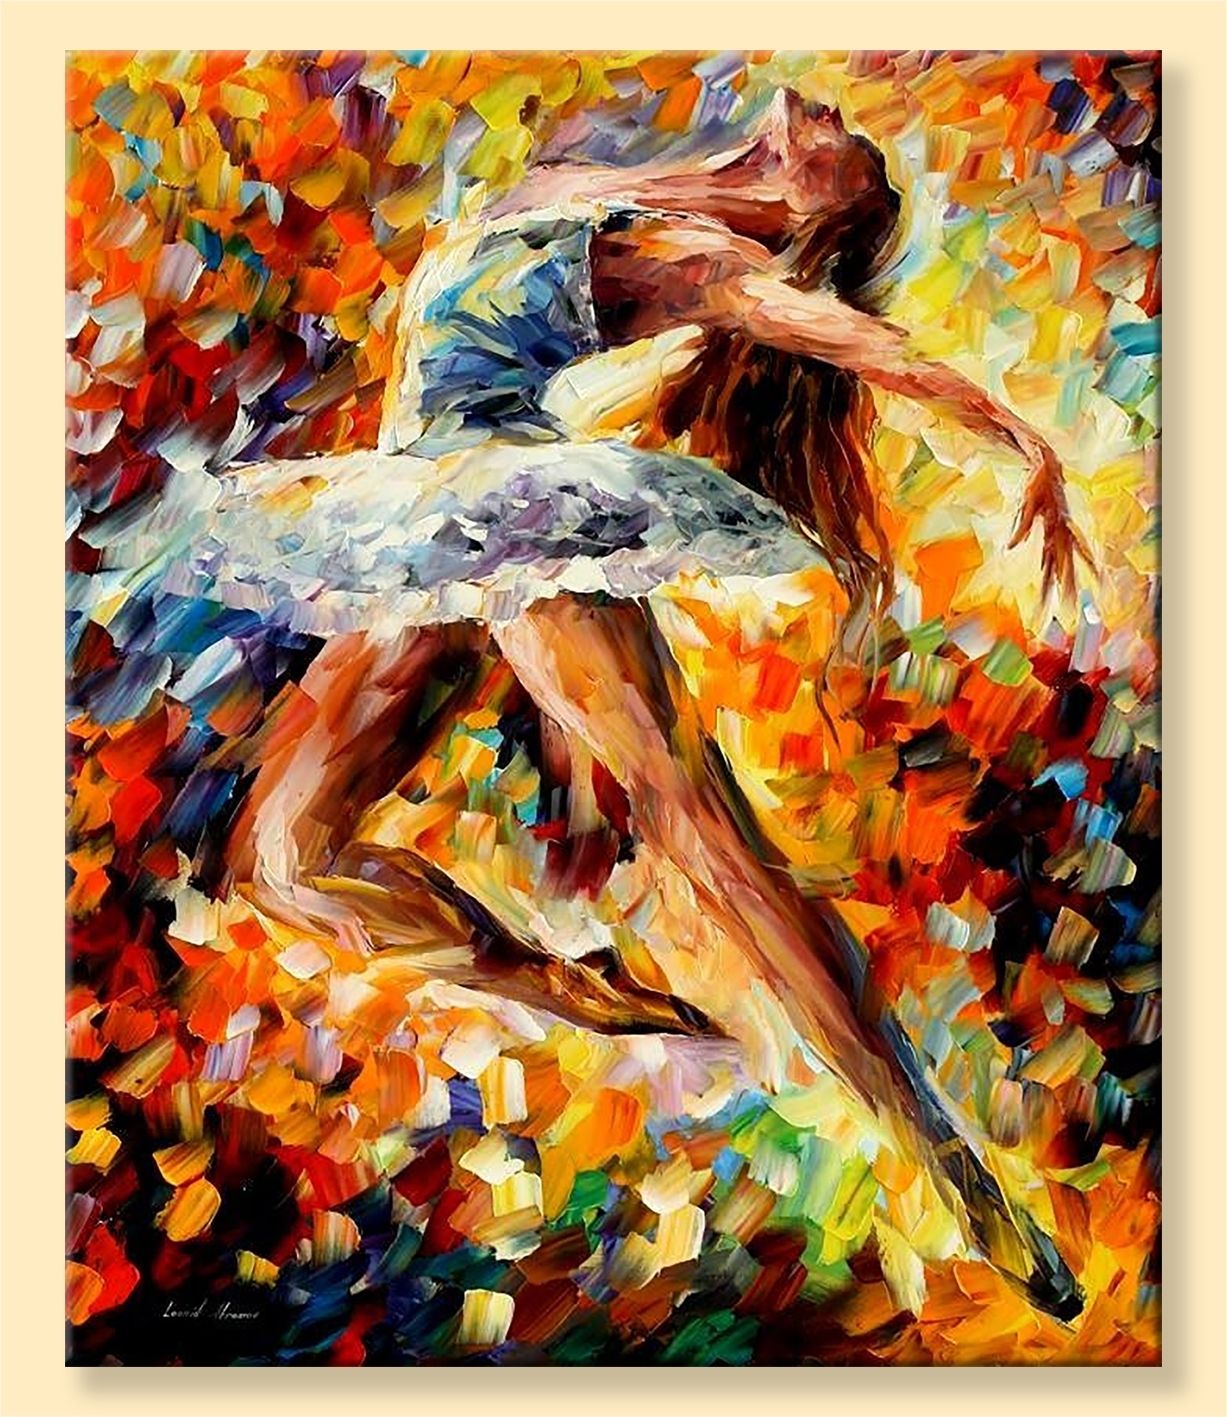 Elevation — Limited Edition Ballerina Ballet Dancer Wall Art Decor Intended For Most Recently Released Limited Edition Wall Art (View 4 of 20)